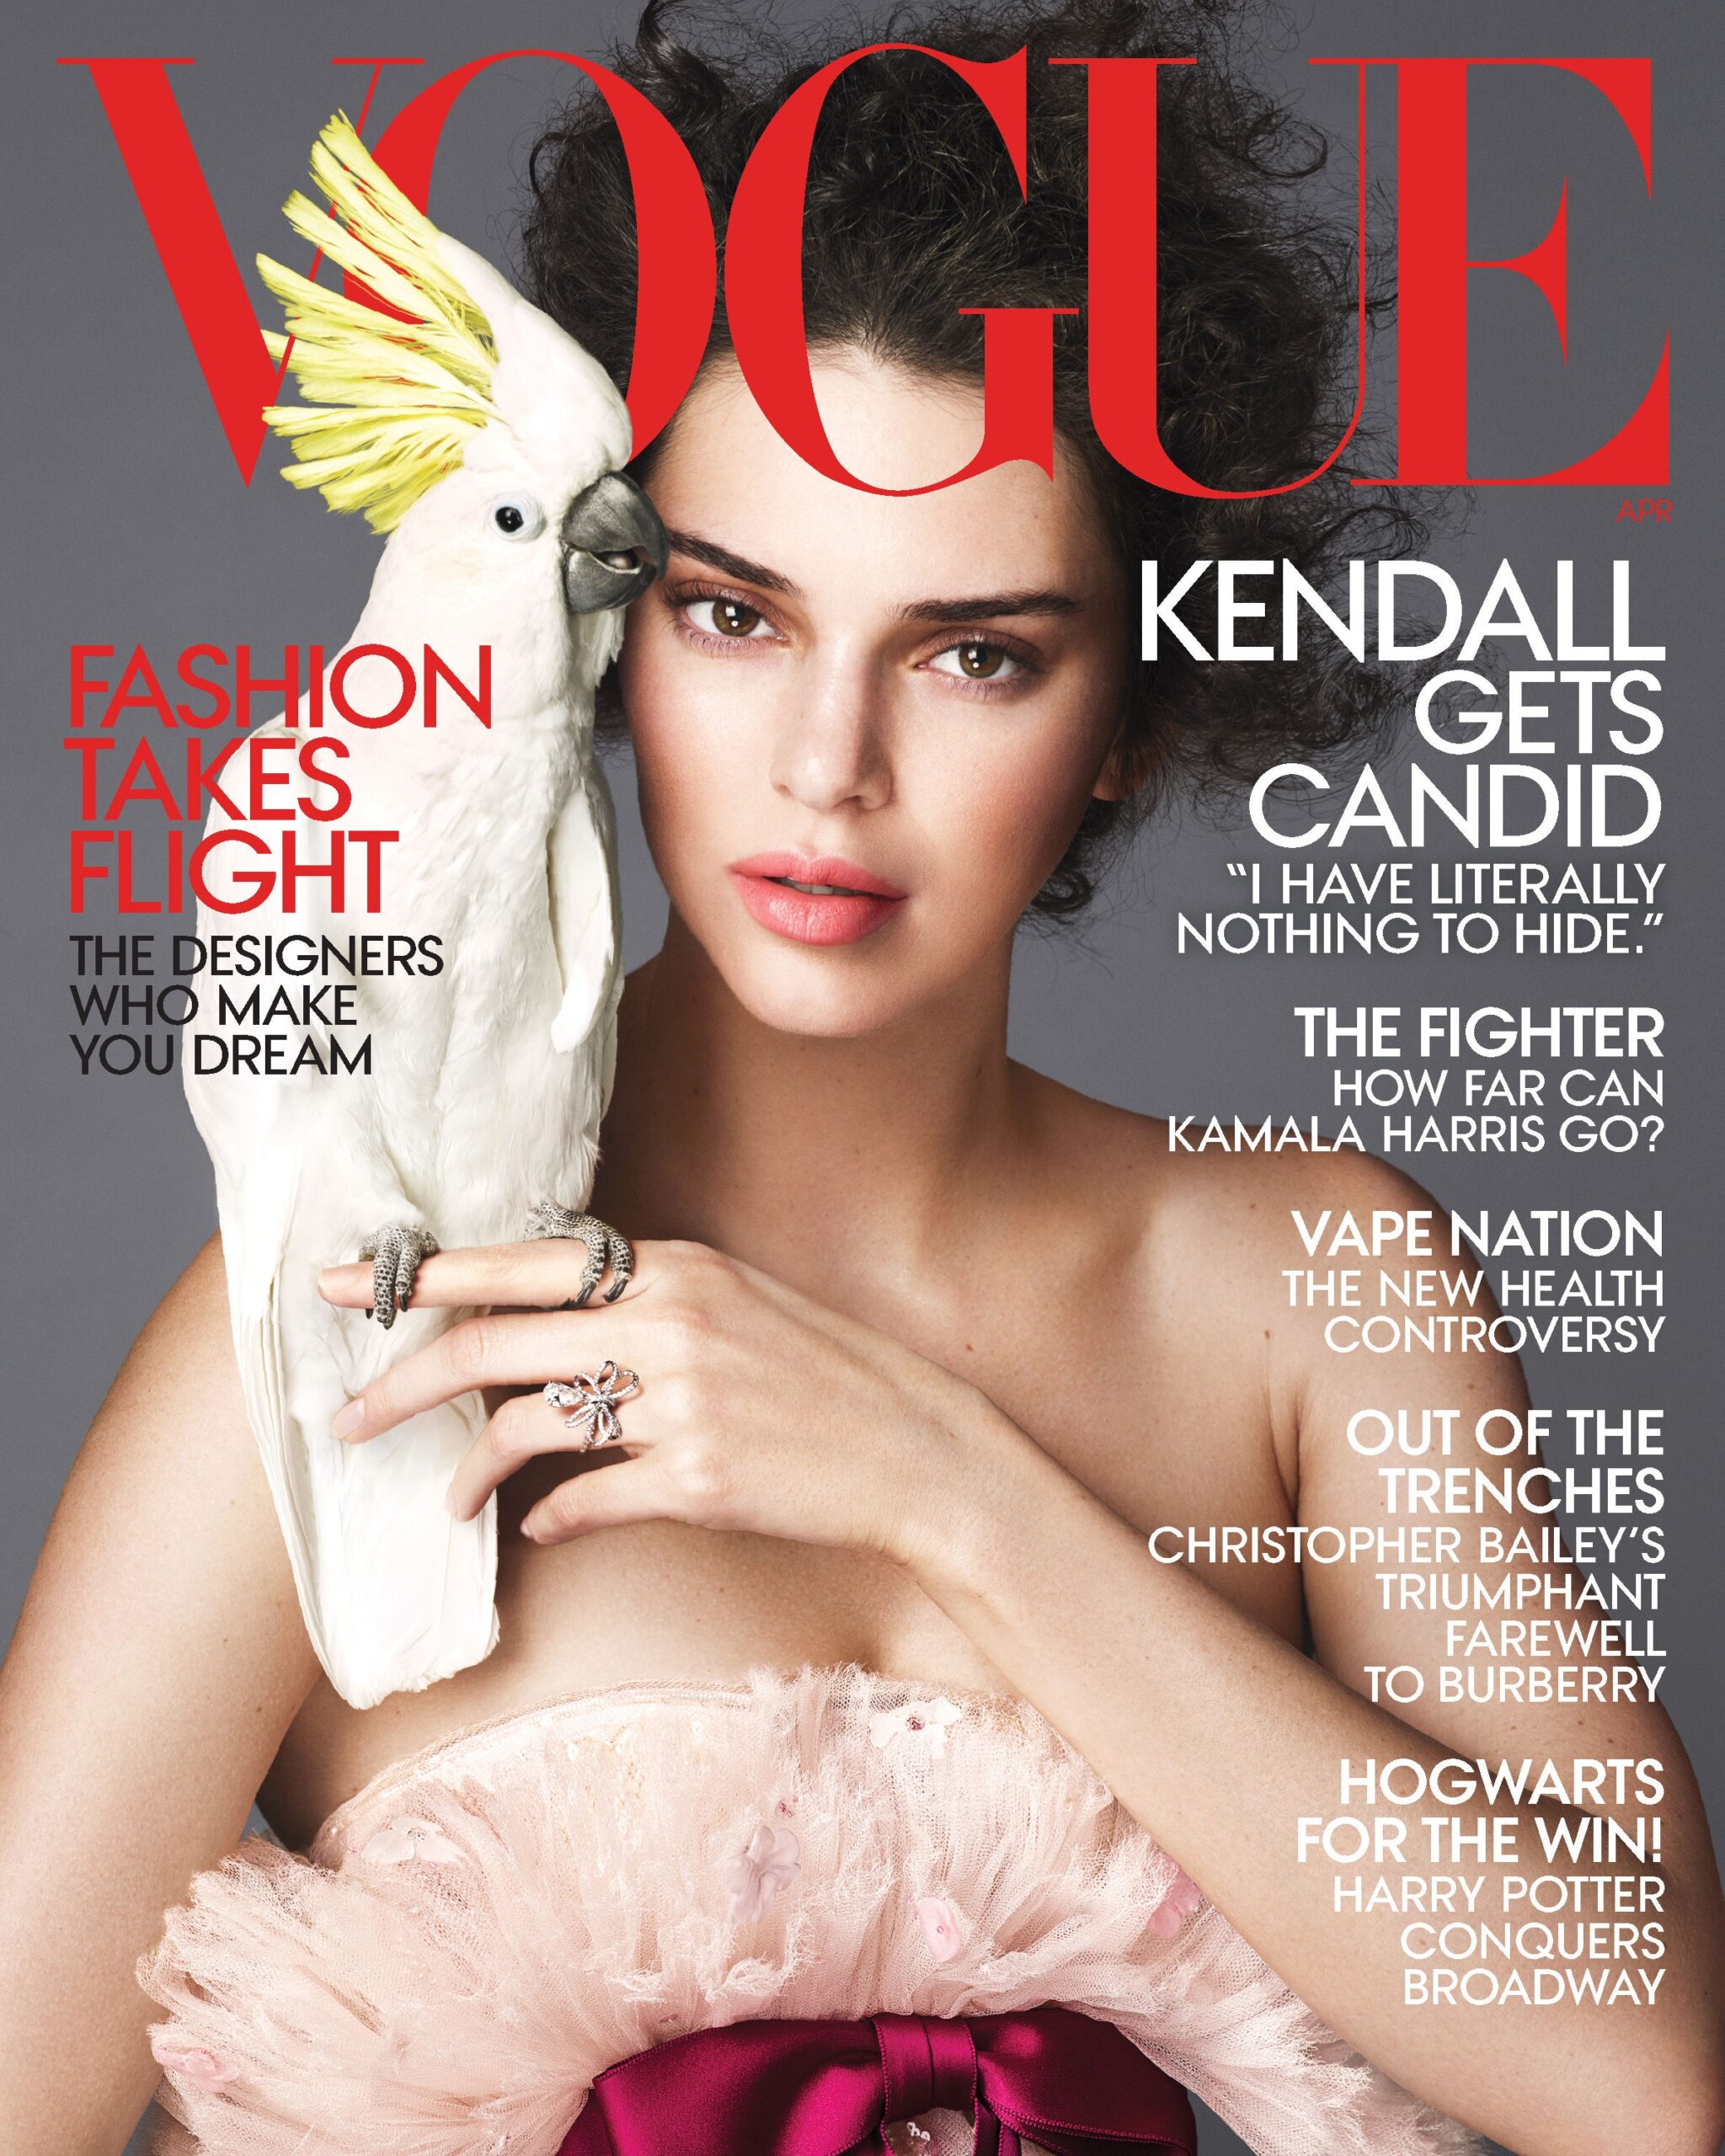 Kendall Jenner poses for a cover in the VOGUE magazine